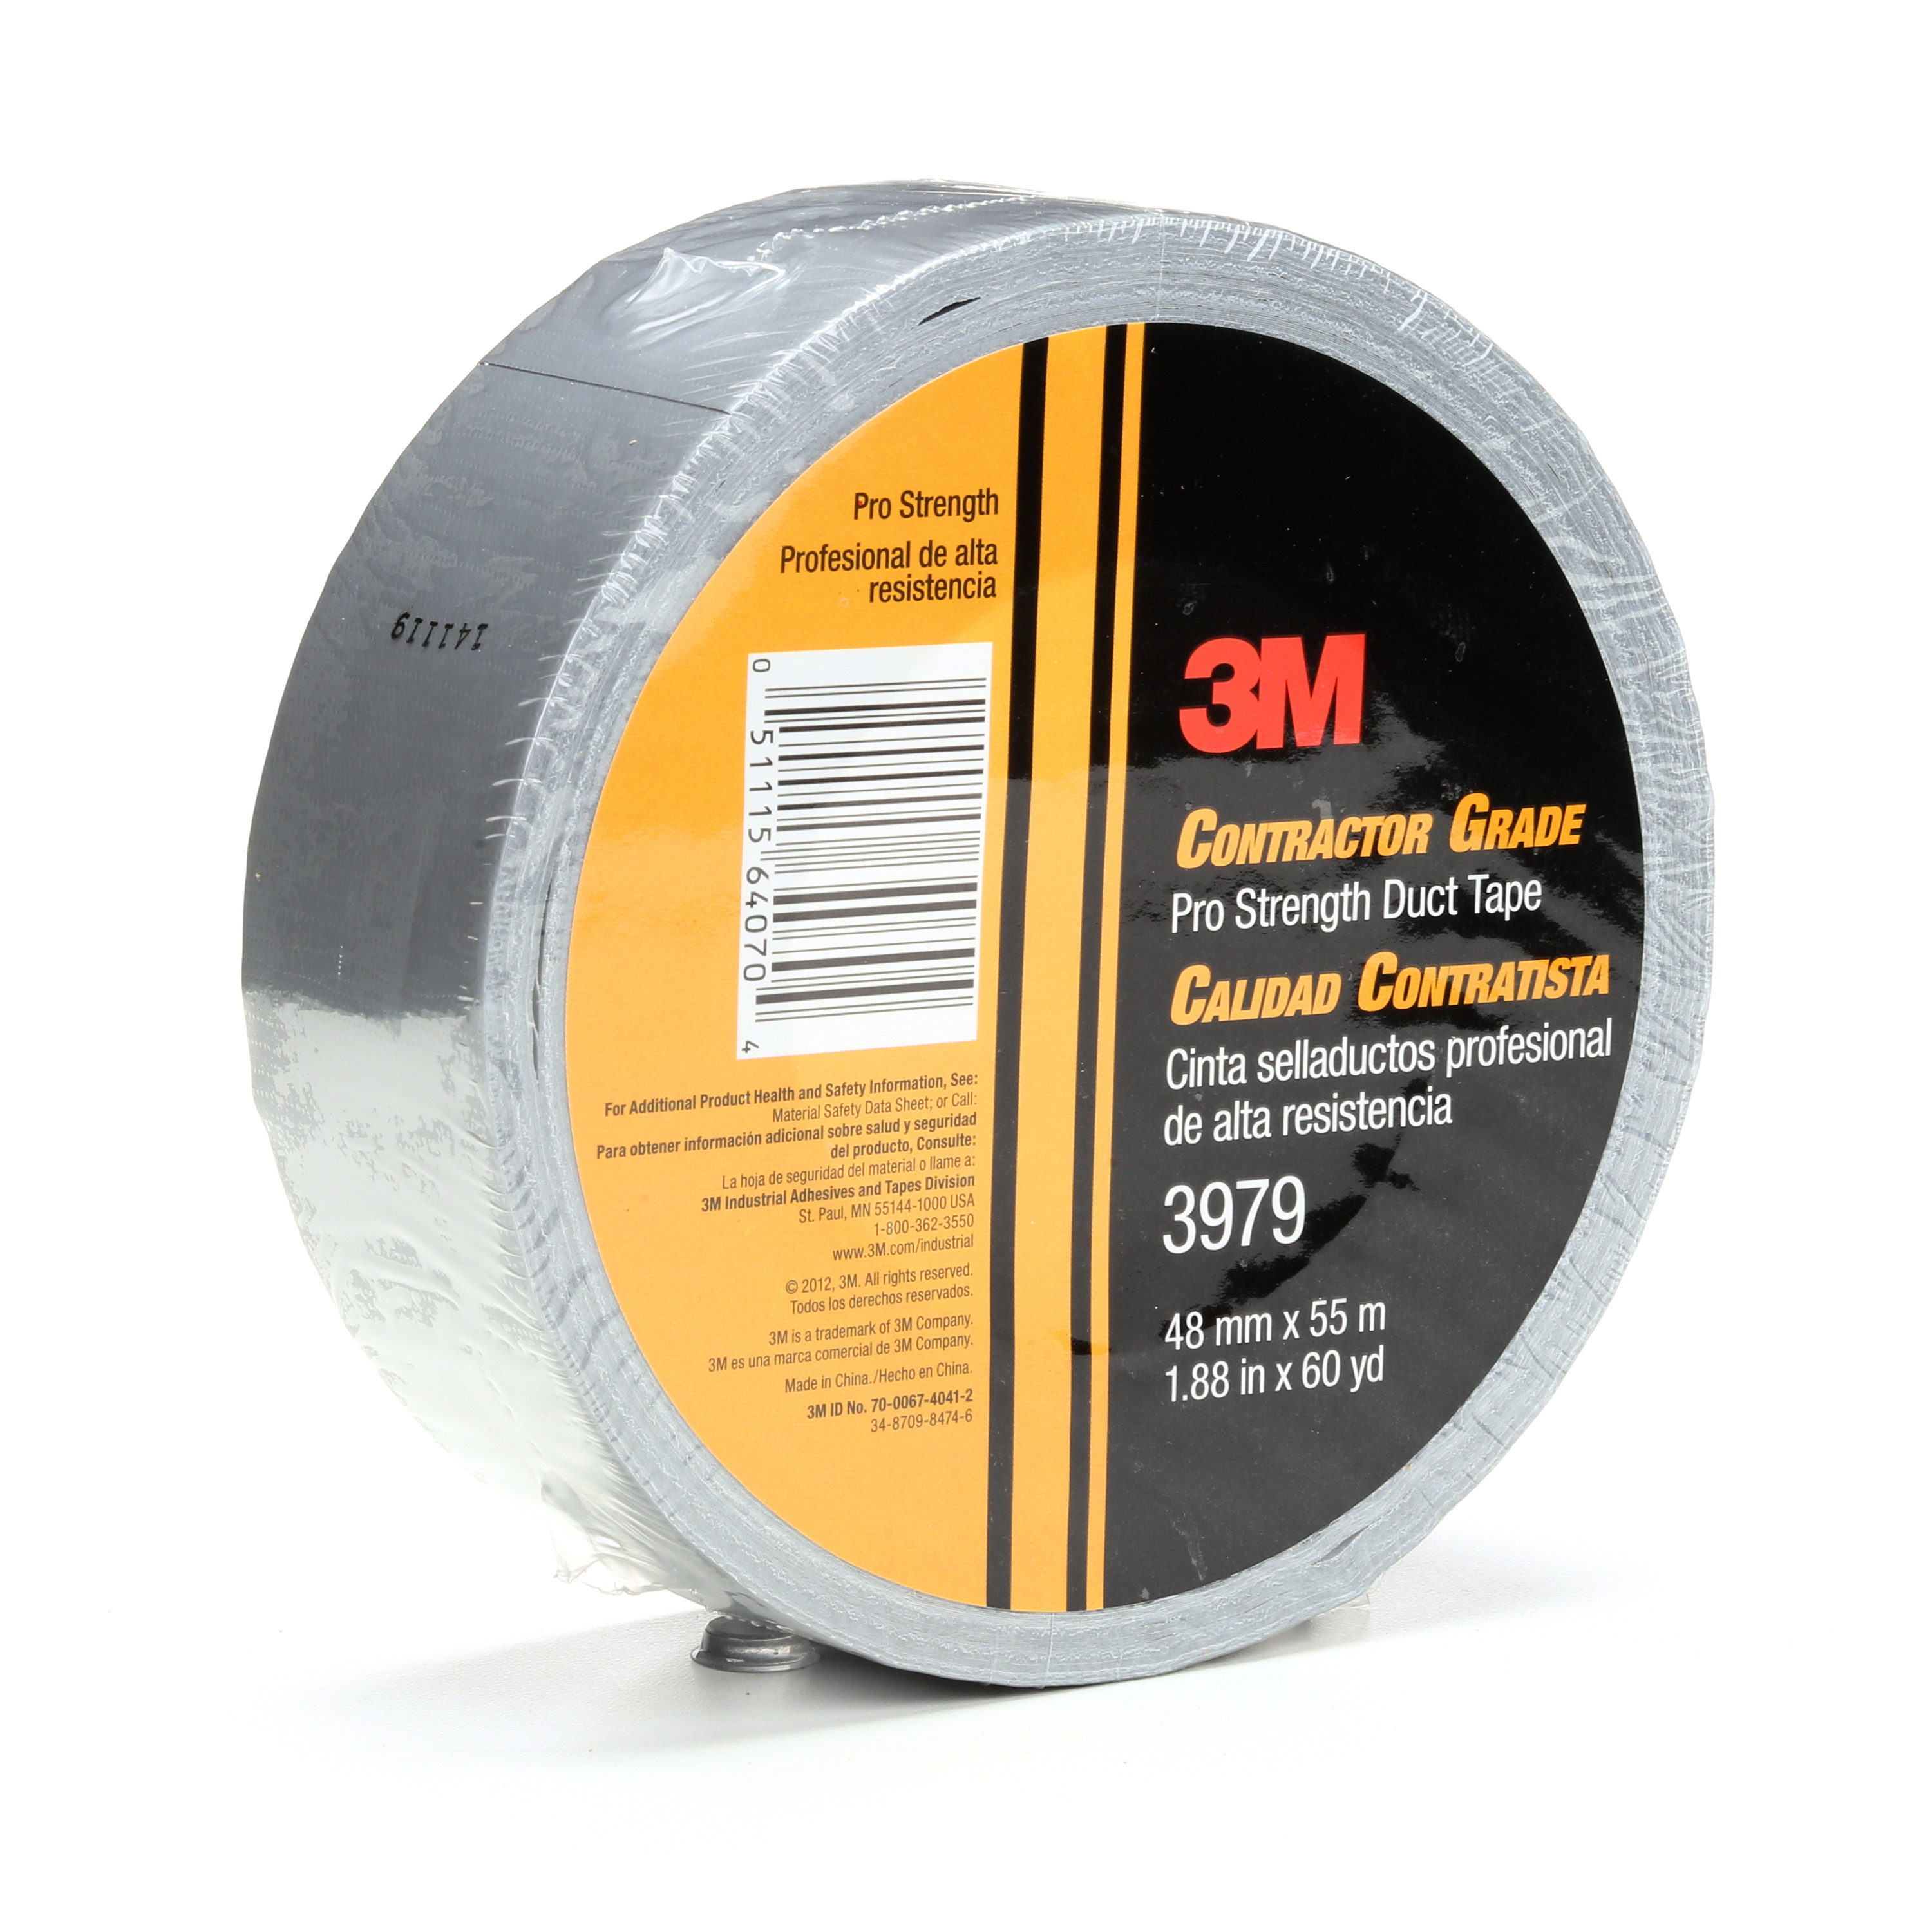 3M™ Contractor Grade Pro Strength Duct Tape 3979, Silver, 1.88 in x 60
yd, 24 per case, Individually Wrapped Conveniently Packaged